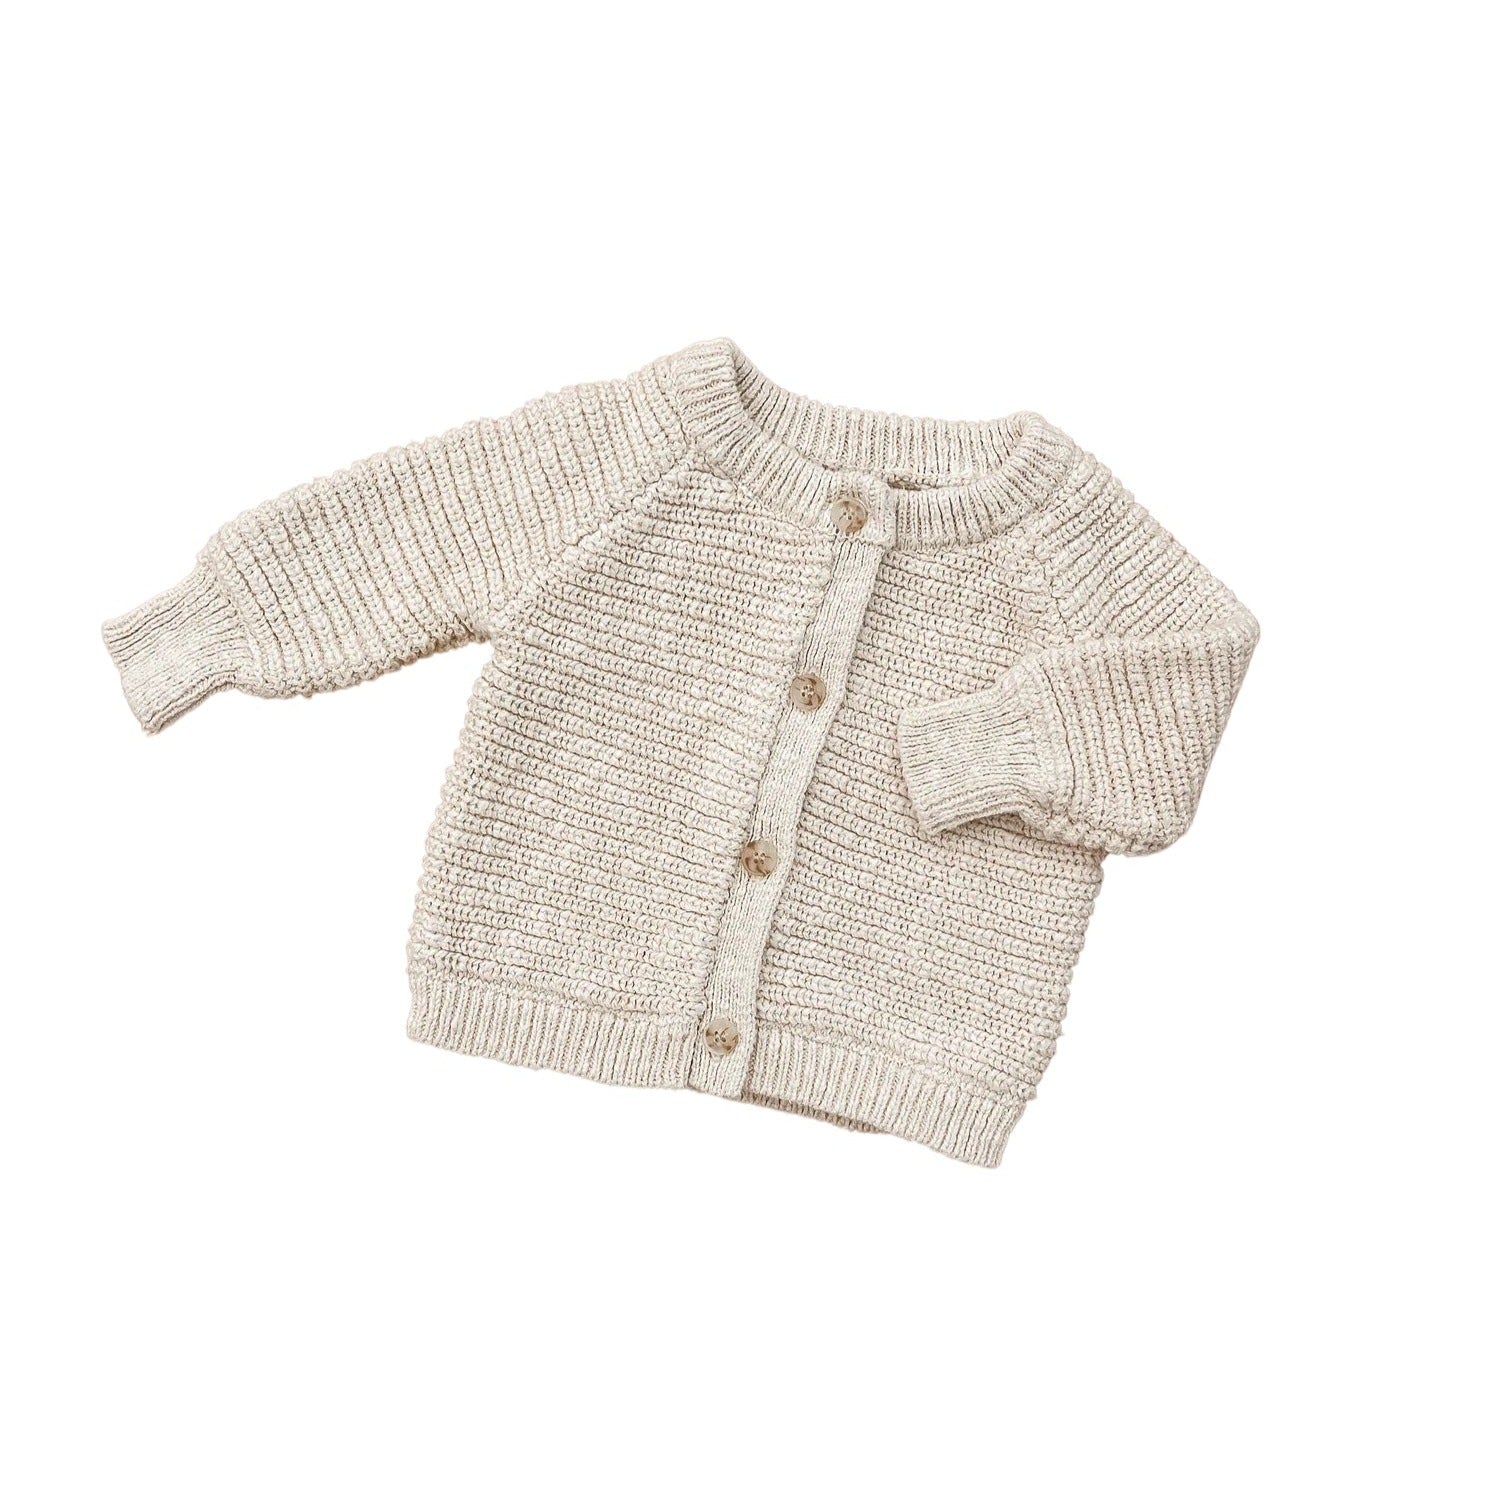 Ziggy Lou knit cardigan - angus and dudley